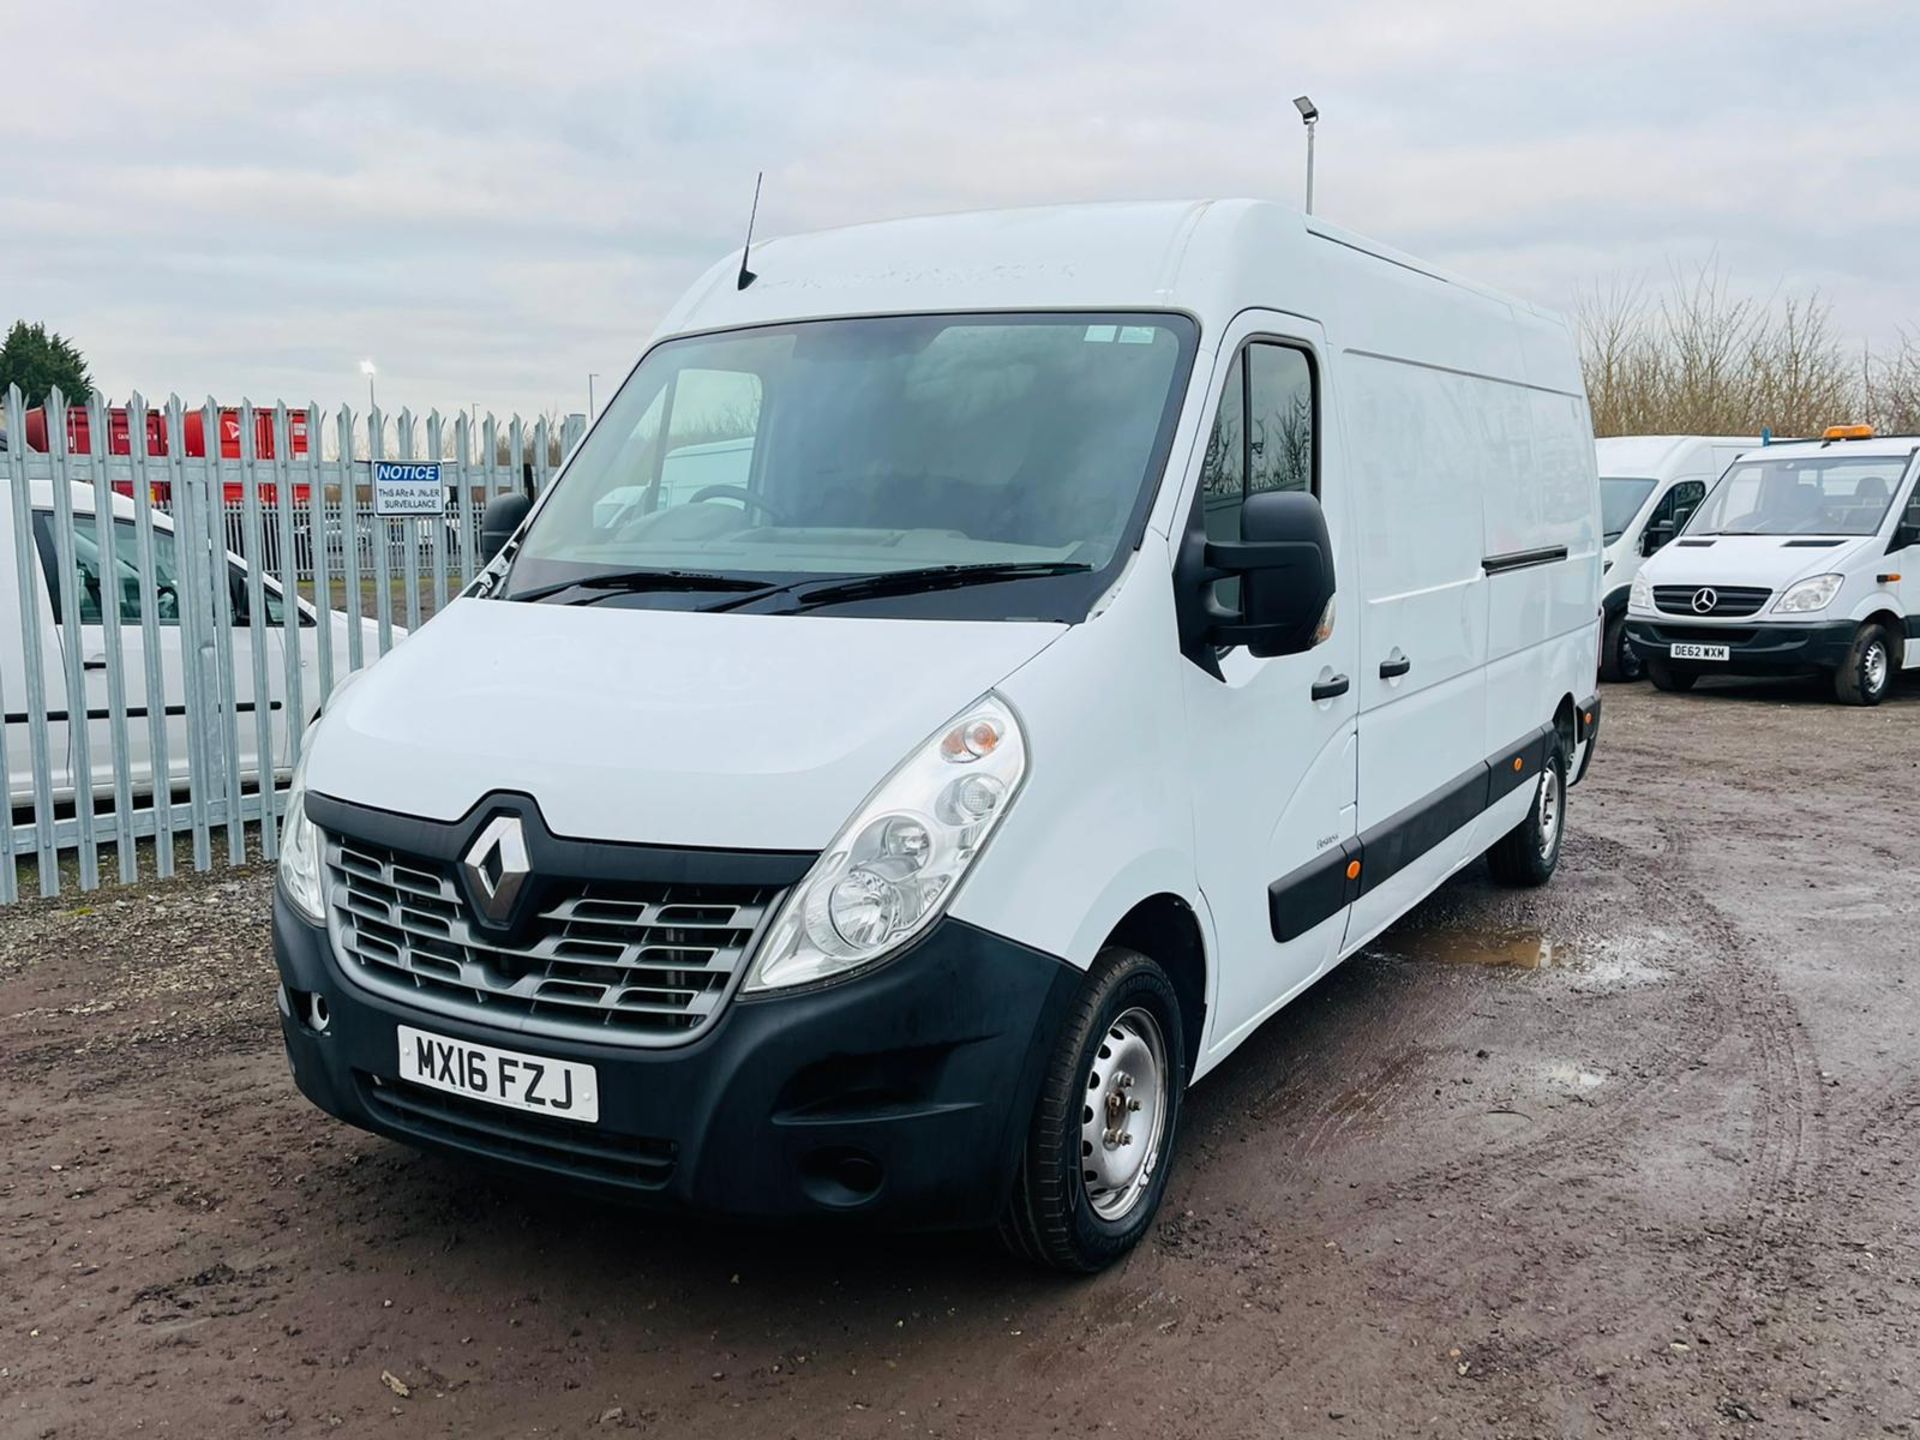 Renault Master 2.3 DCI 110 Business LM35 L3 H2 2016 '16 reg' Fridge/Freezer - Fully Insulated - Image 5 of 23